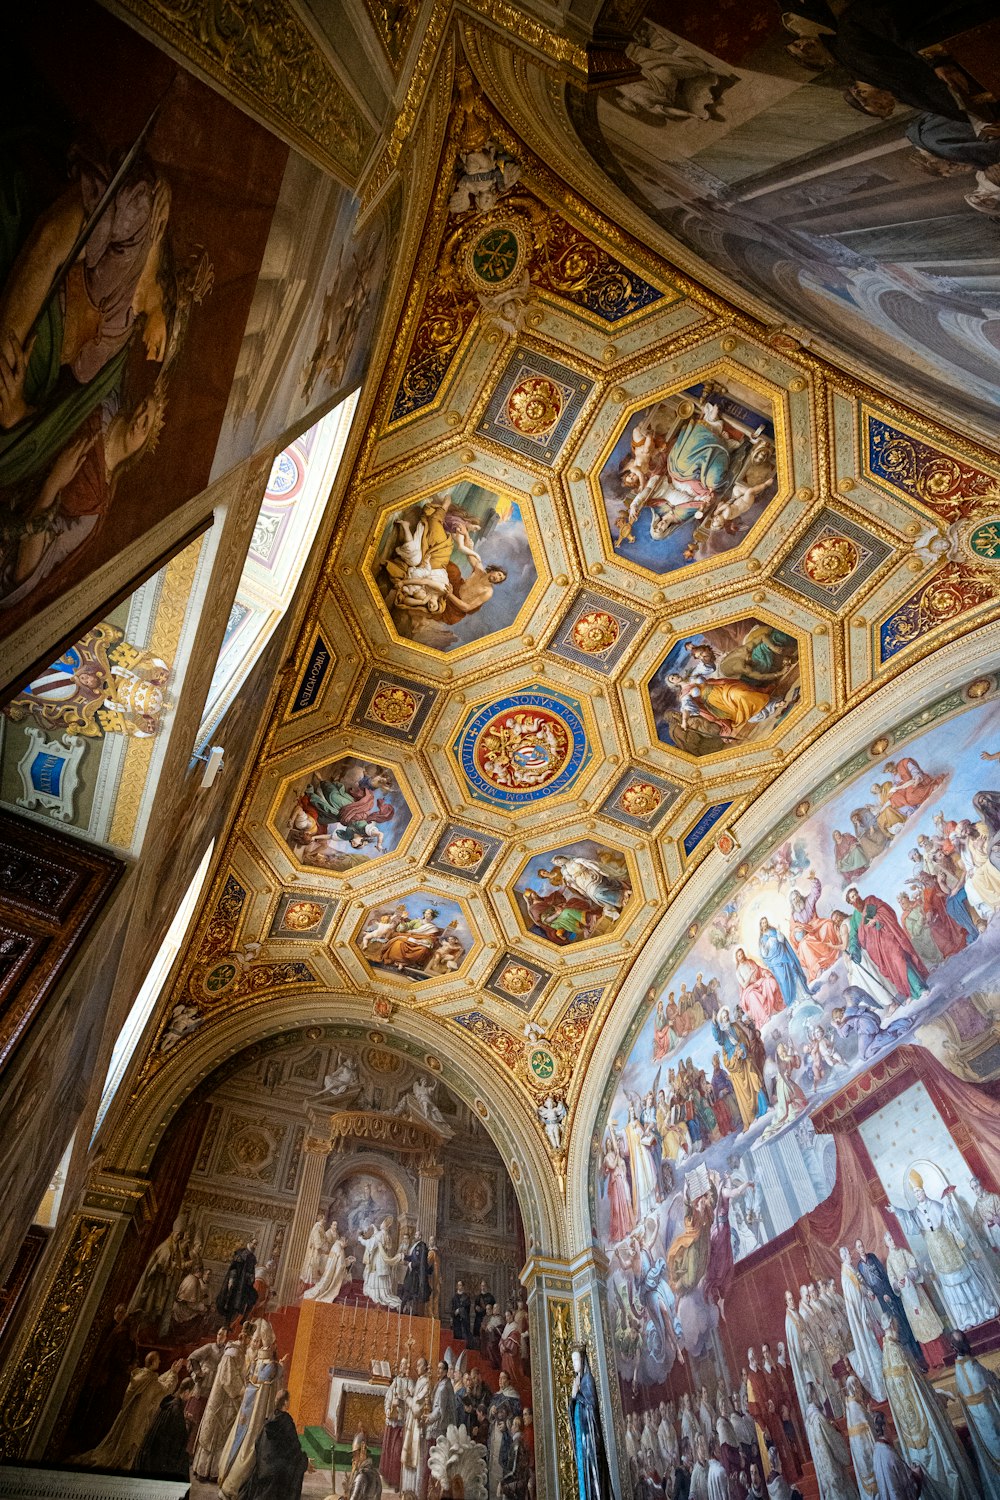 the ceiling of a church with paintings on it